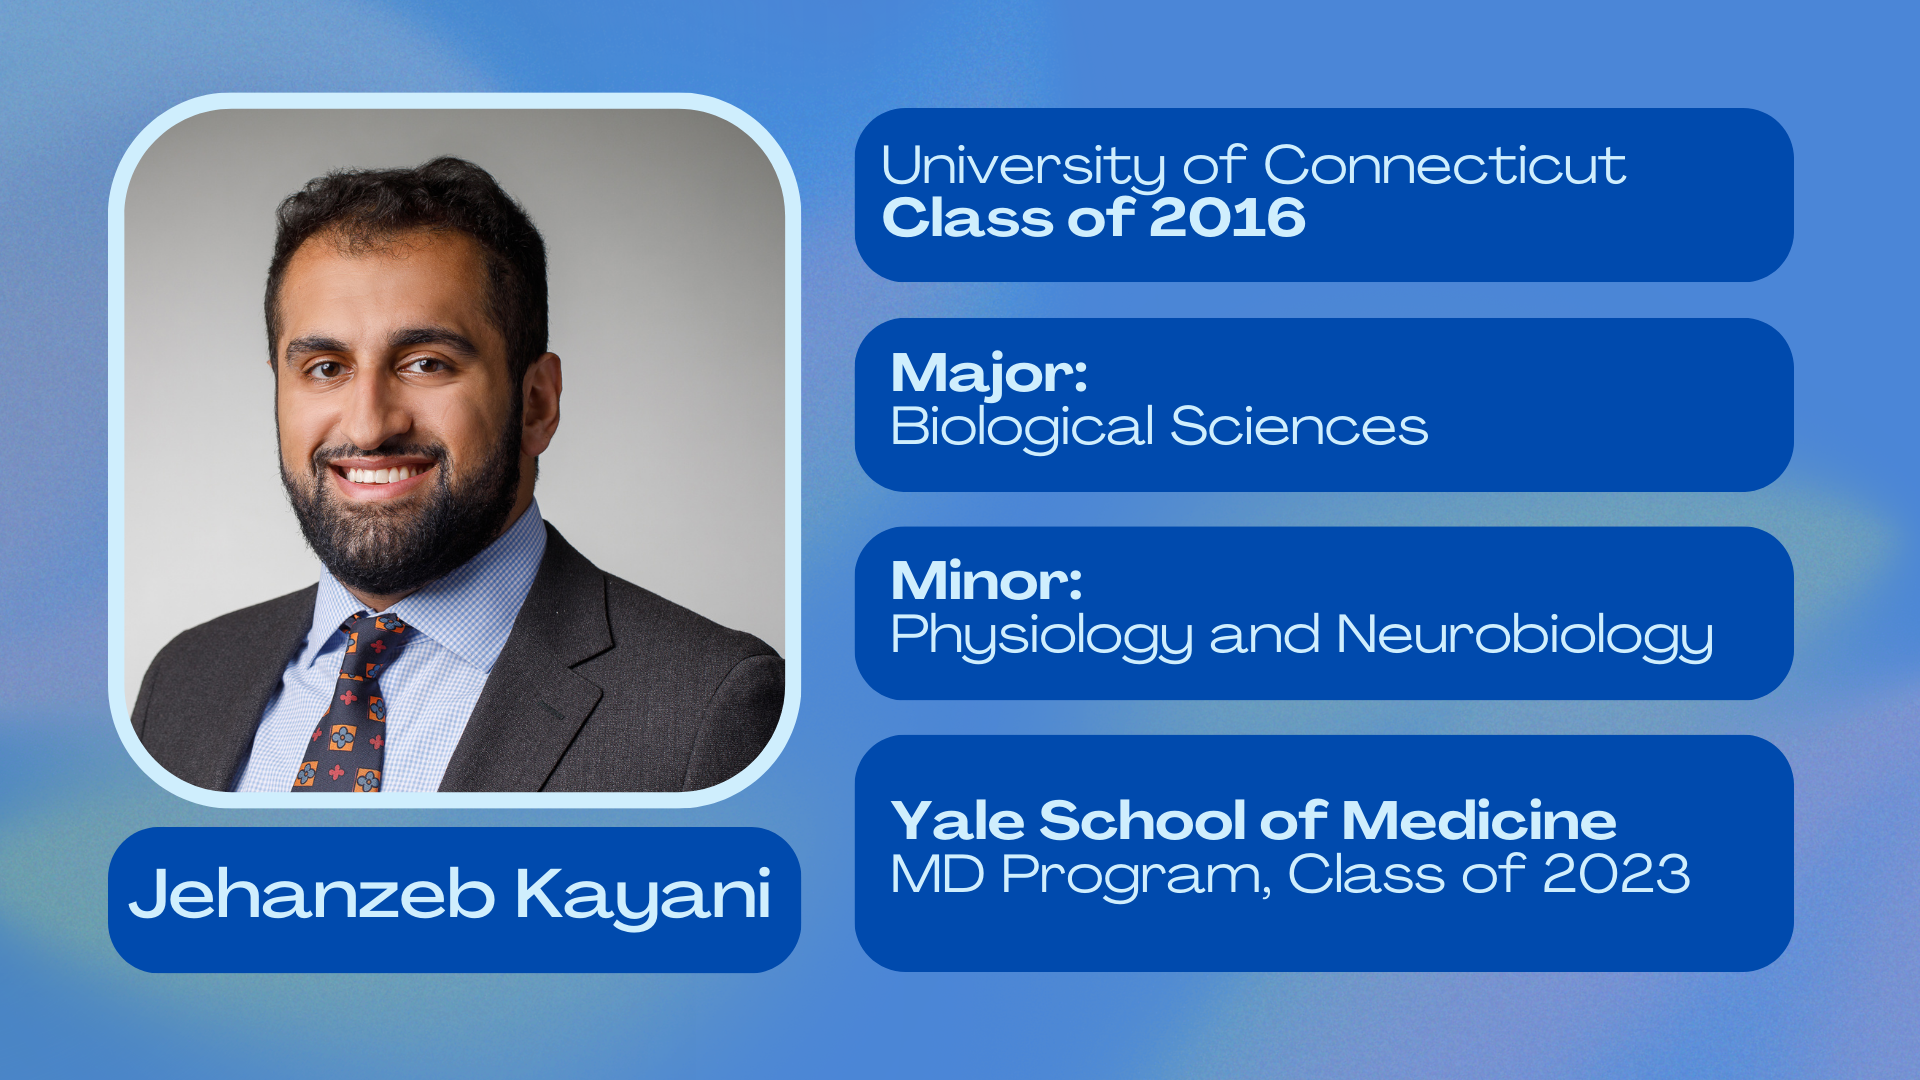 Jehanzeb Kayani; University of Connecticut Class of 2016; Major: Biological Sciences; Minor: Physiology and Neurobiology; Yale School of Medicine MD Program class of 2023